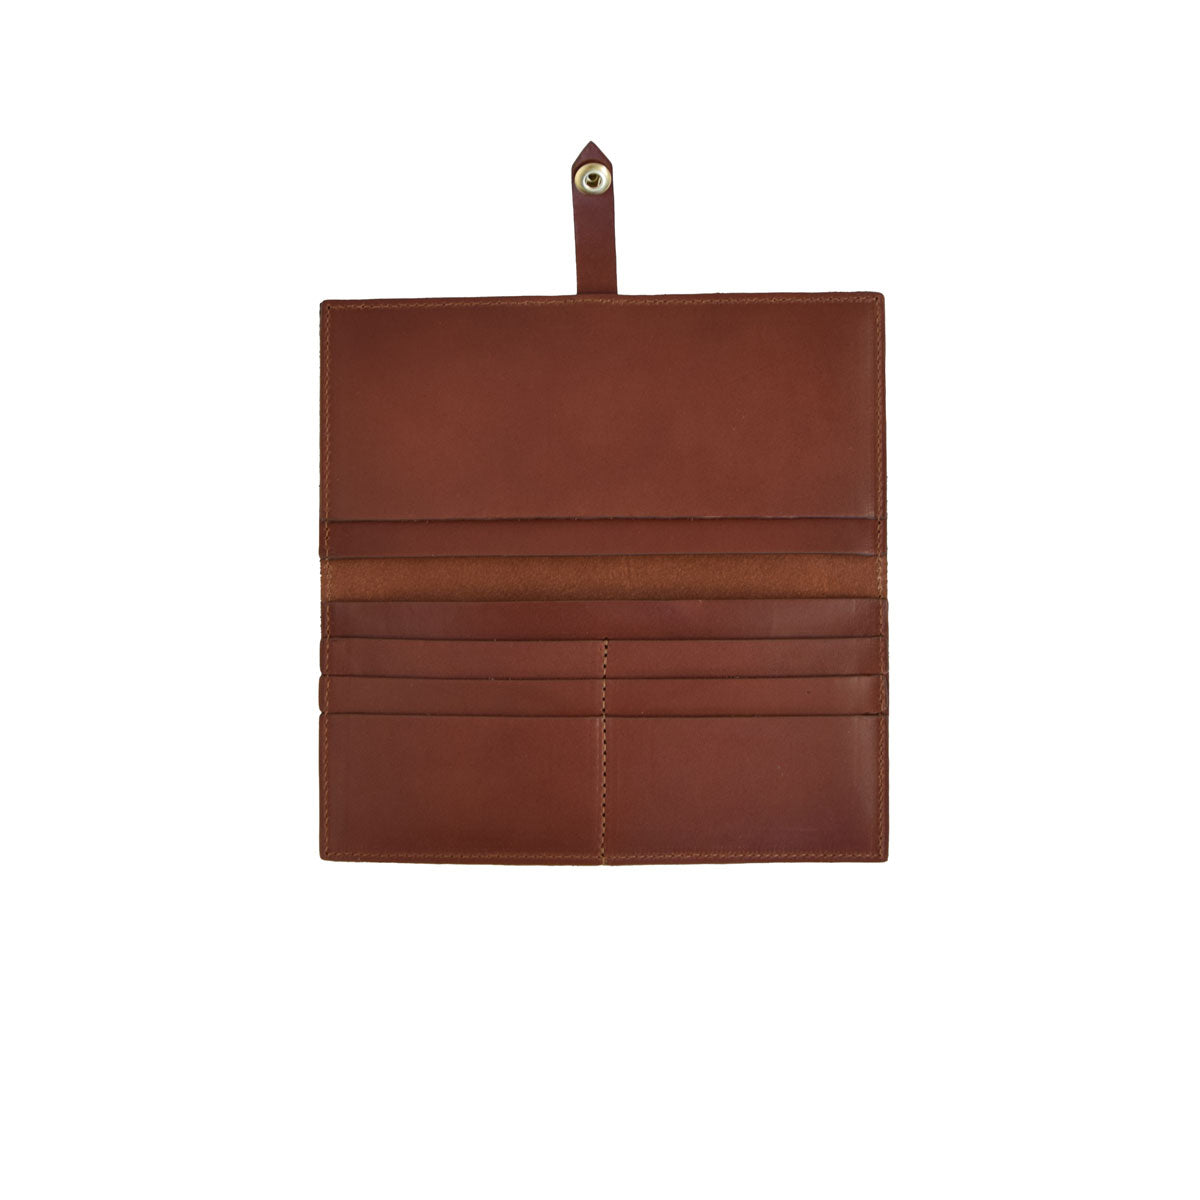 Lincoln Park Wallet | Maple